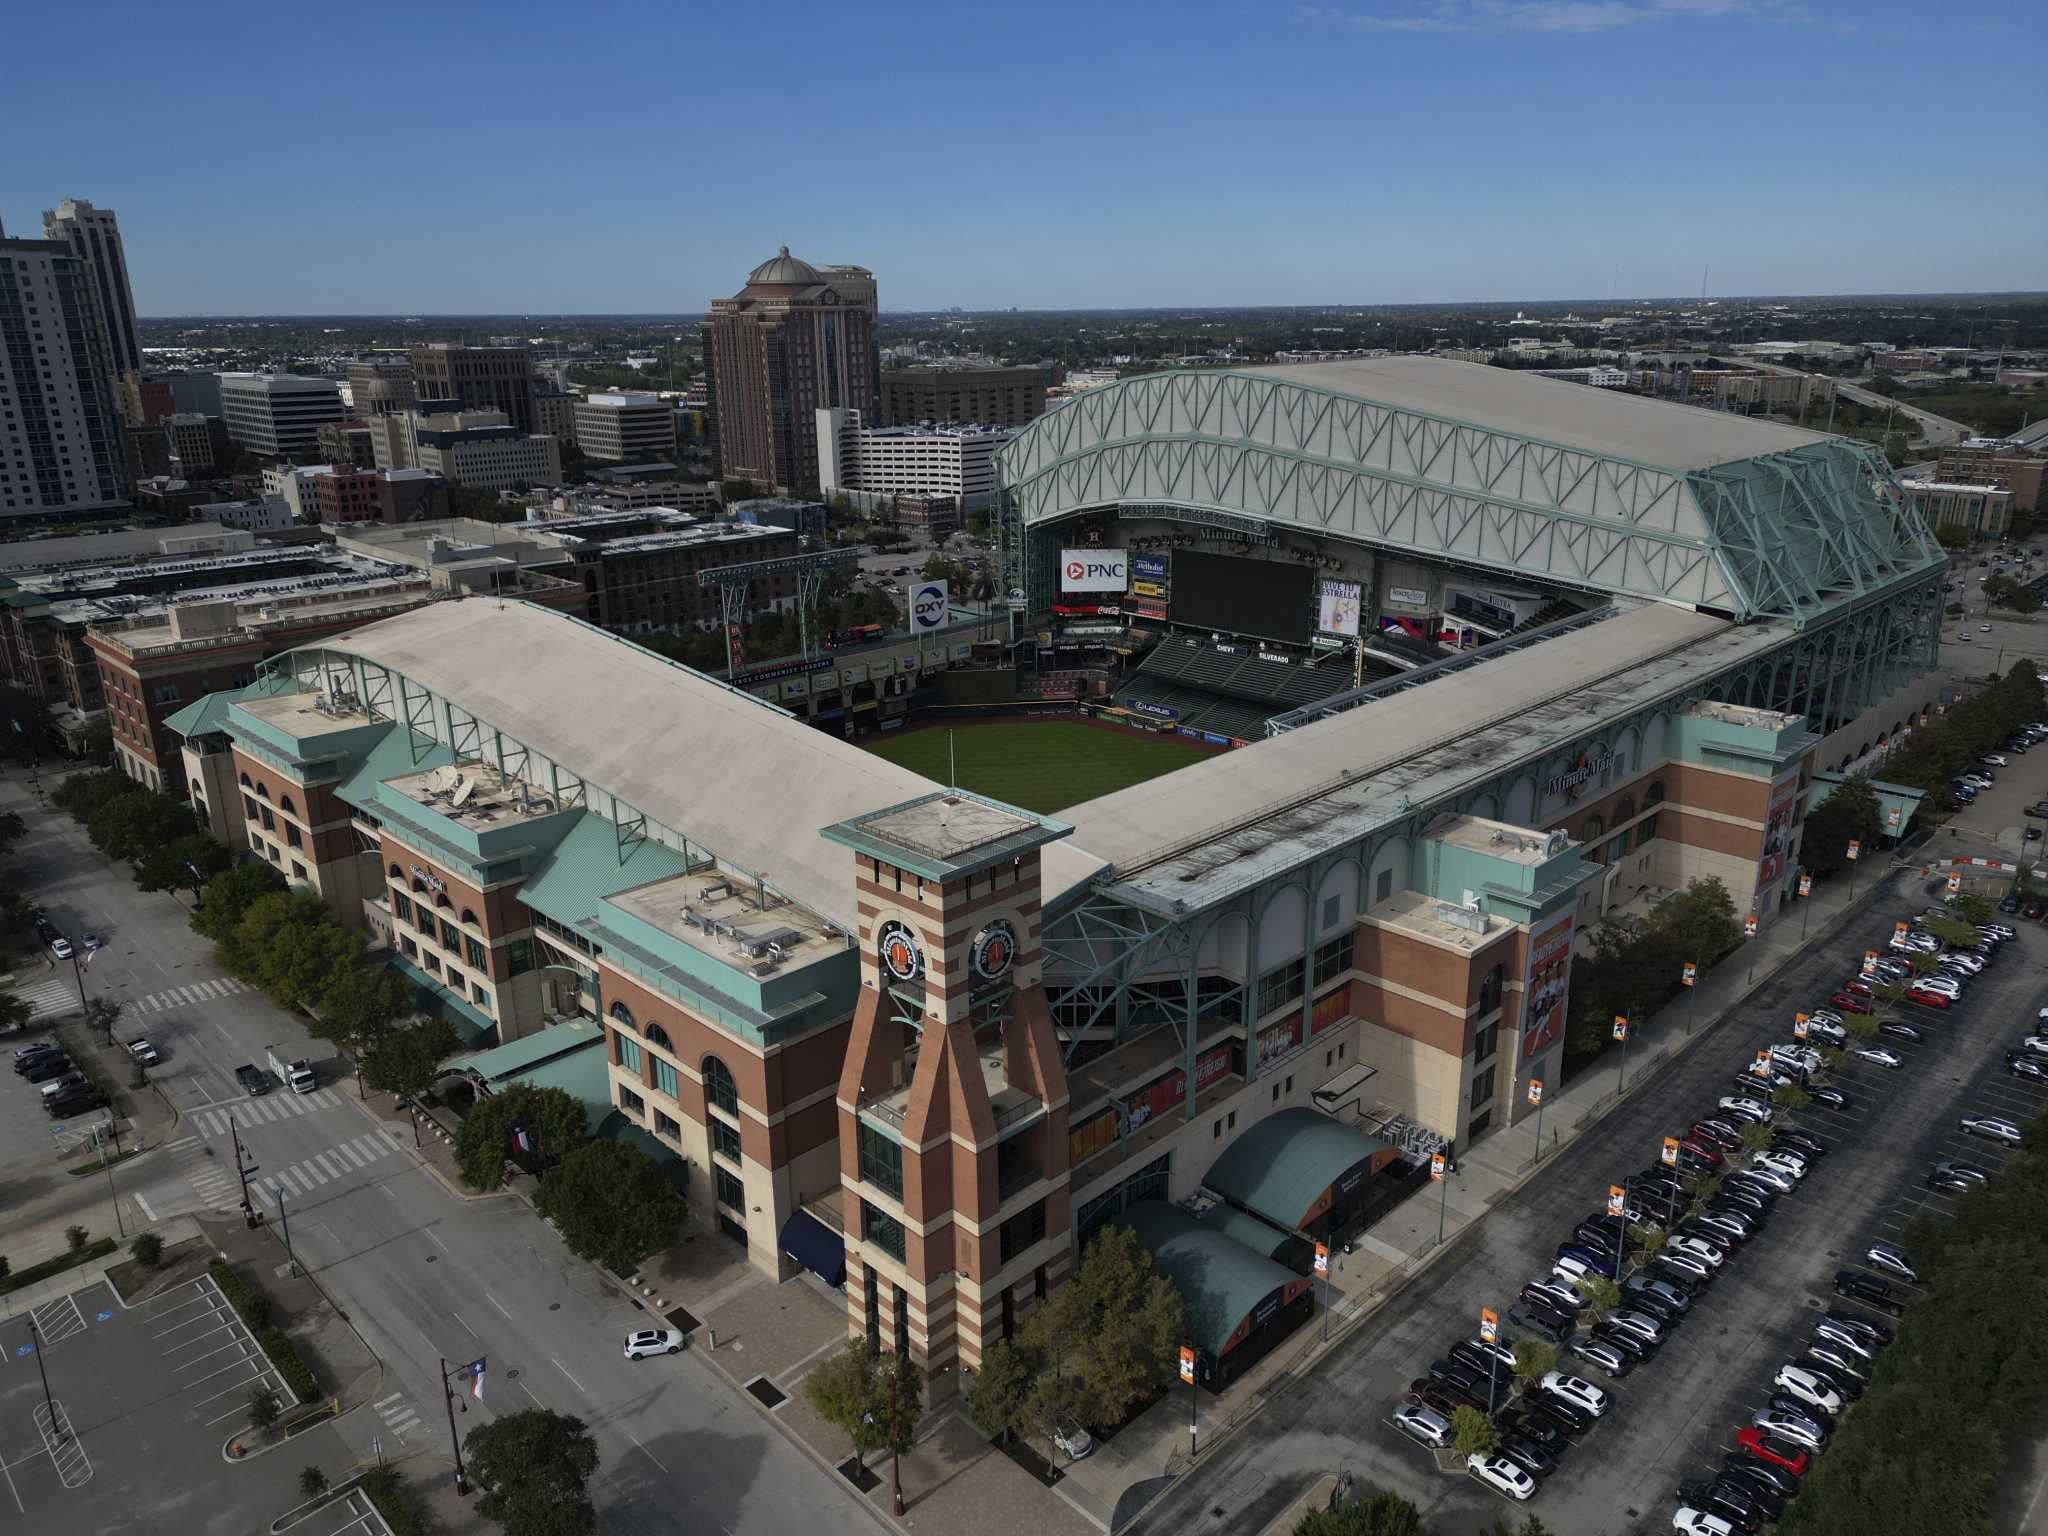 New Minute Maid Park display technology on tap for 2023 - Ballpark